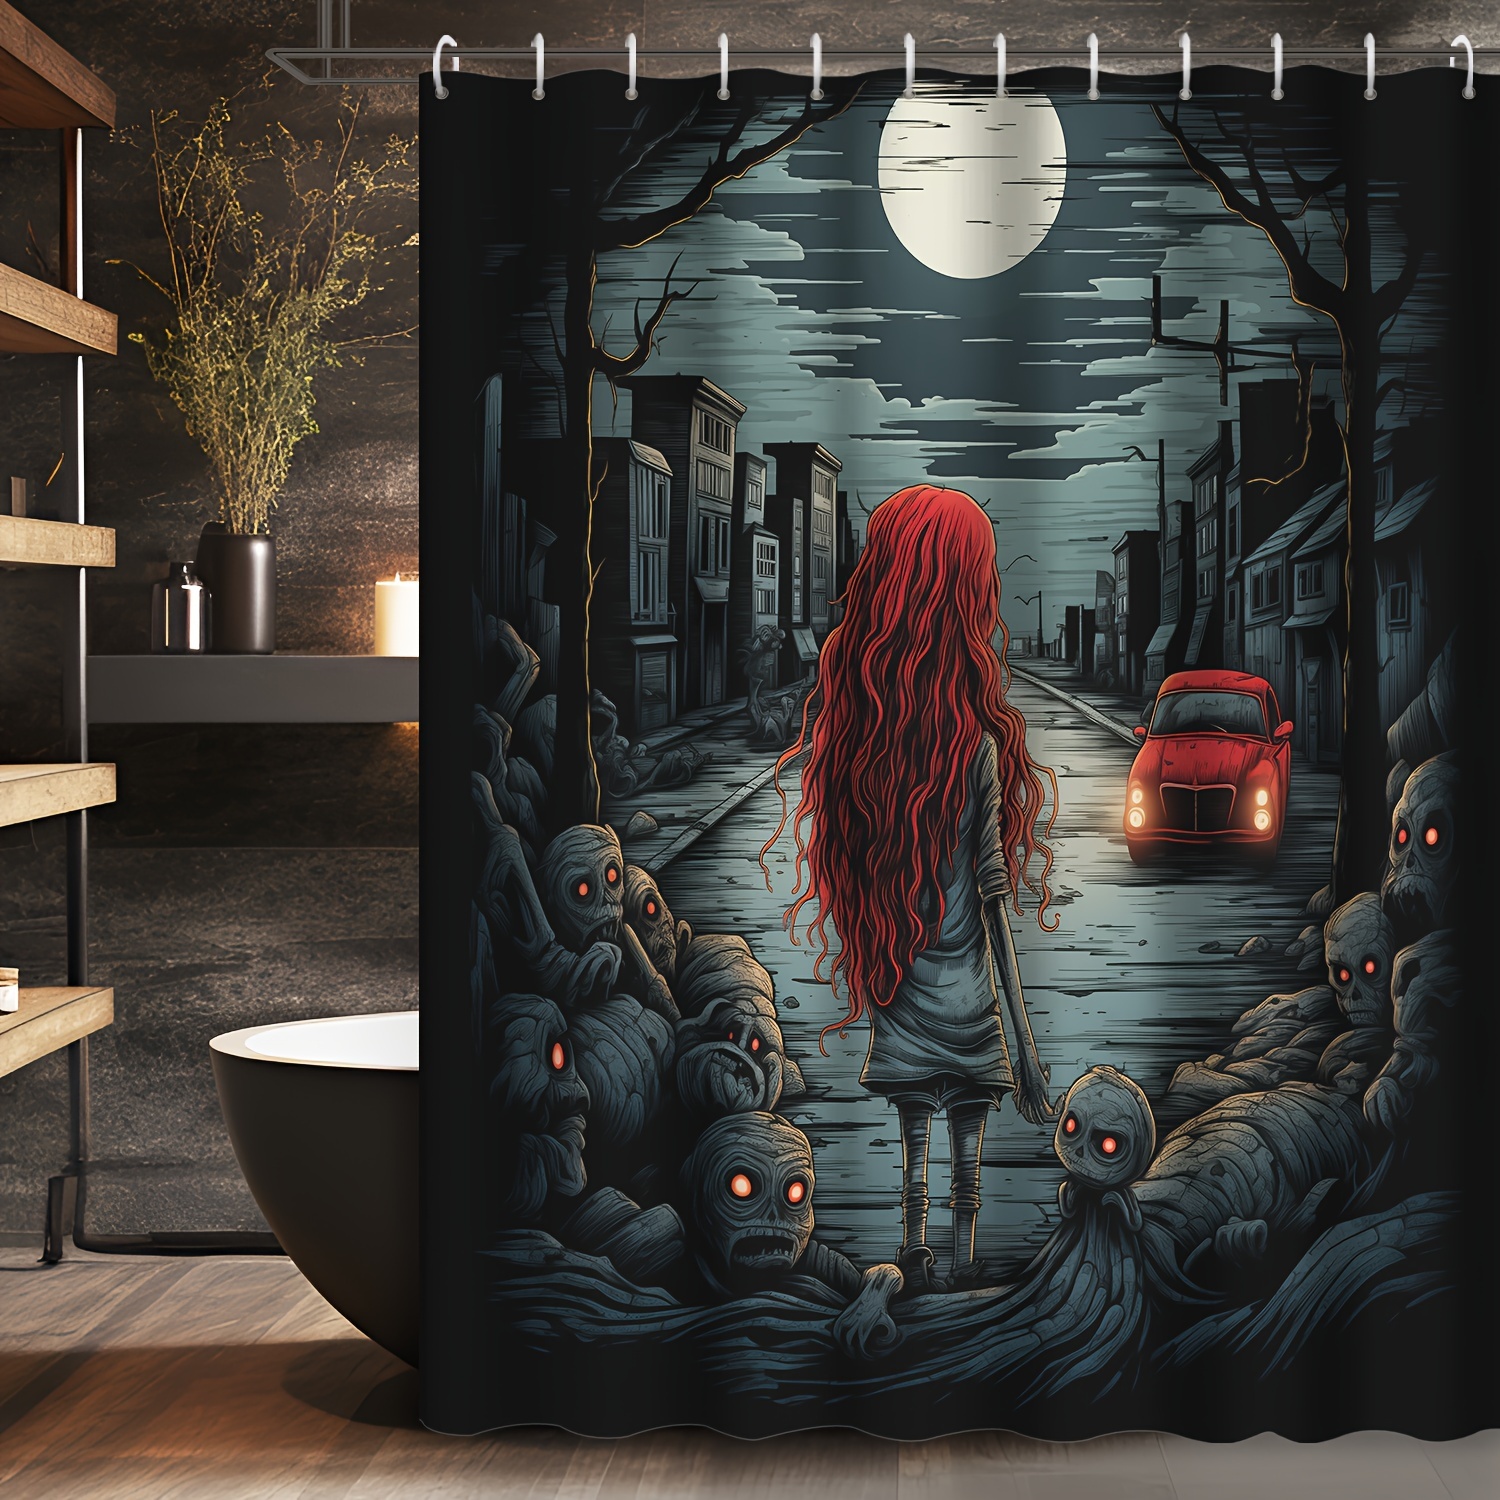 

Water-resistant Polyester Horror Themed Shower Curtain With Grommet Top, Machine Washable, Includes Hooks, Woven Zombie And Skeleton Design - 72x72 Inch For Bathroom Decor